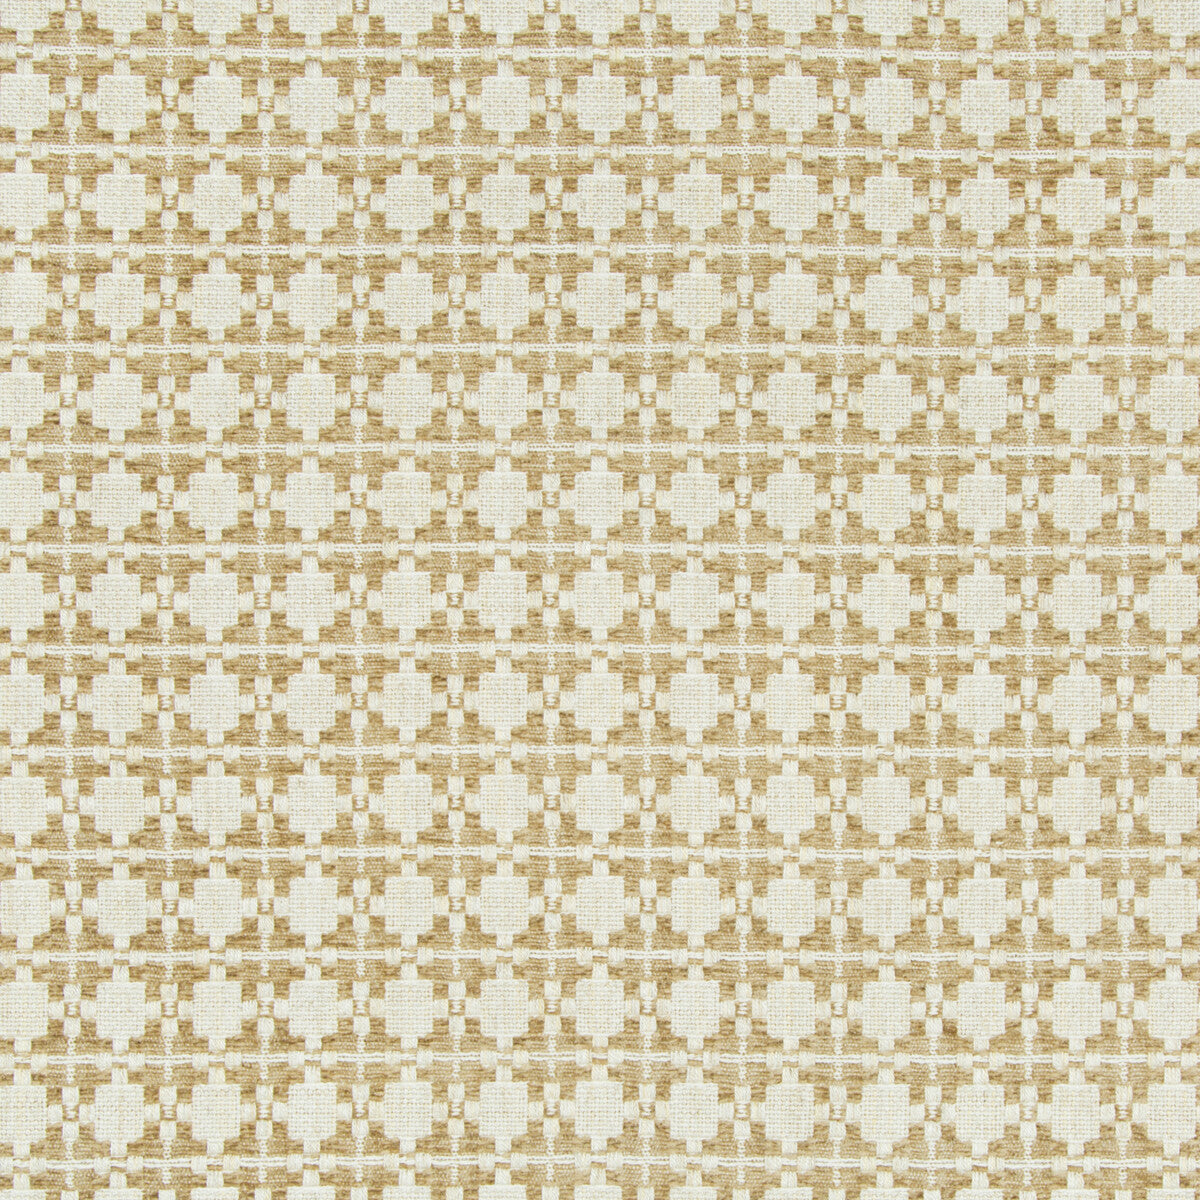 Back In Style fabric in camel color - pattern 34962.4.0 - by Kravet Couture in the Modern Tailor collection